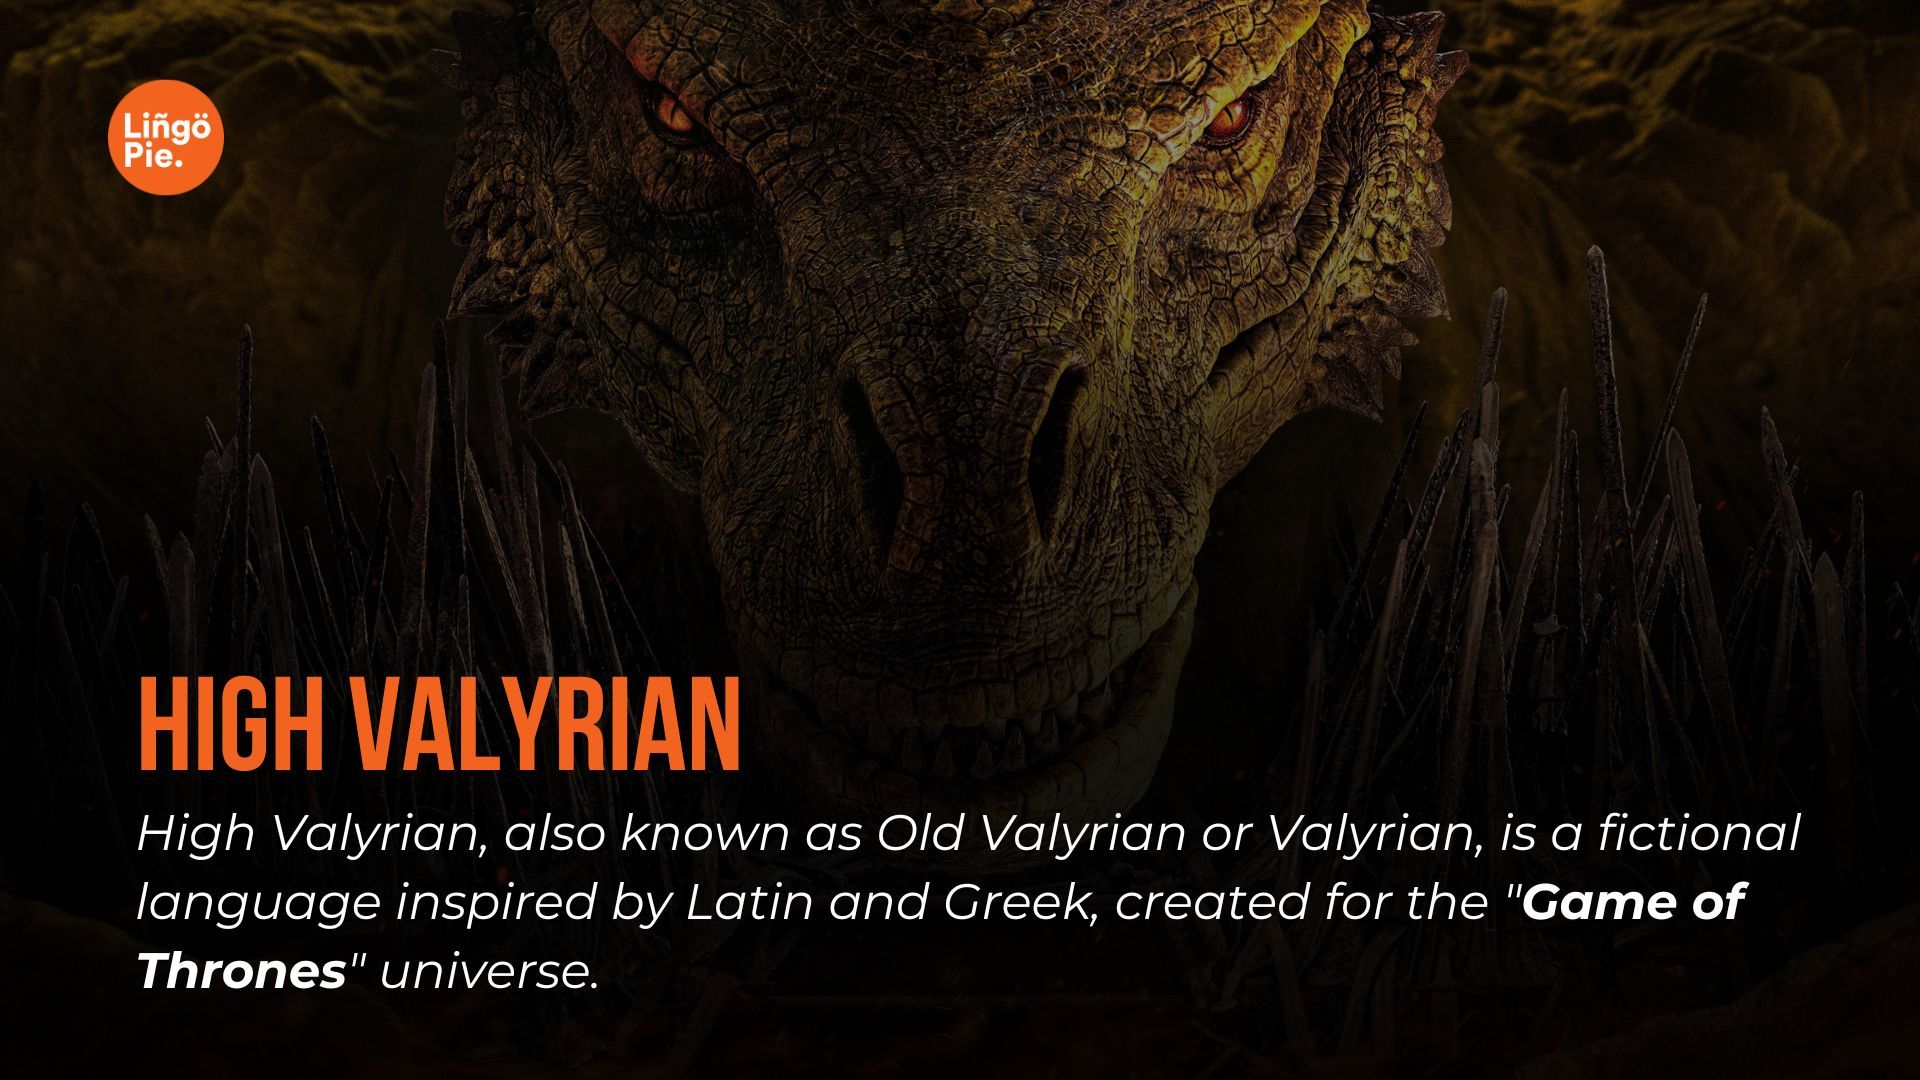 High Valyrian, also known as Old Valyrian or Valyrian, is a fictional language inspired by Latin and Greek, created for the "Game of Thrones" universe.